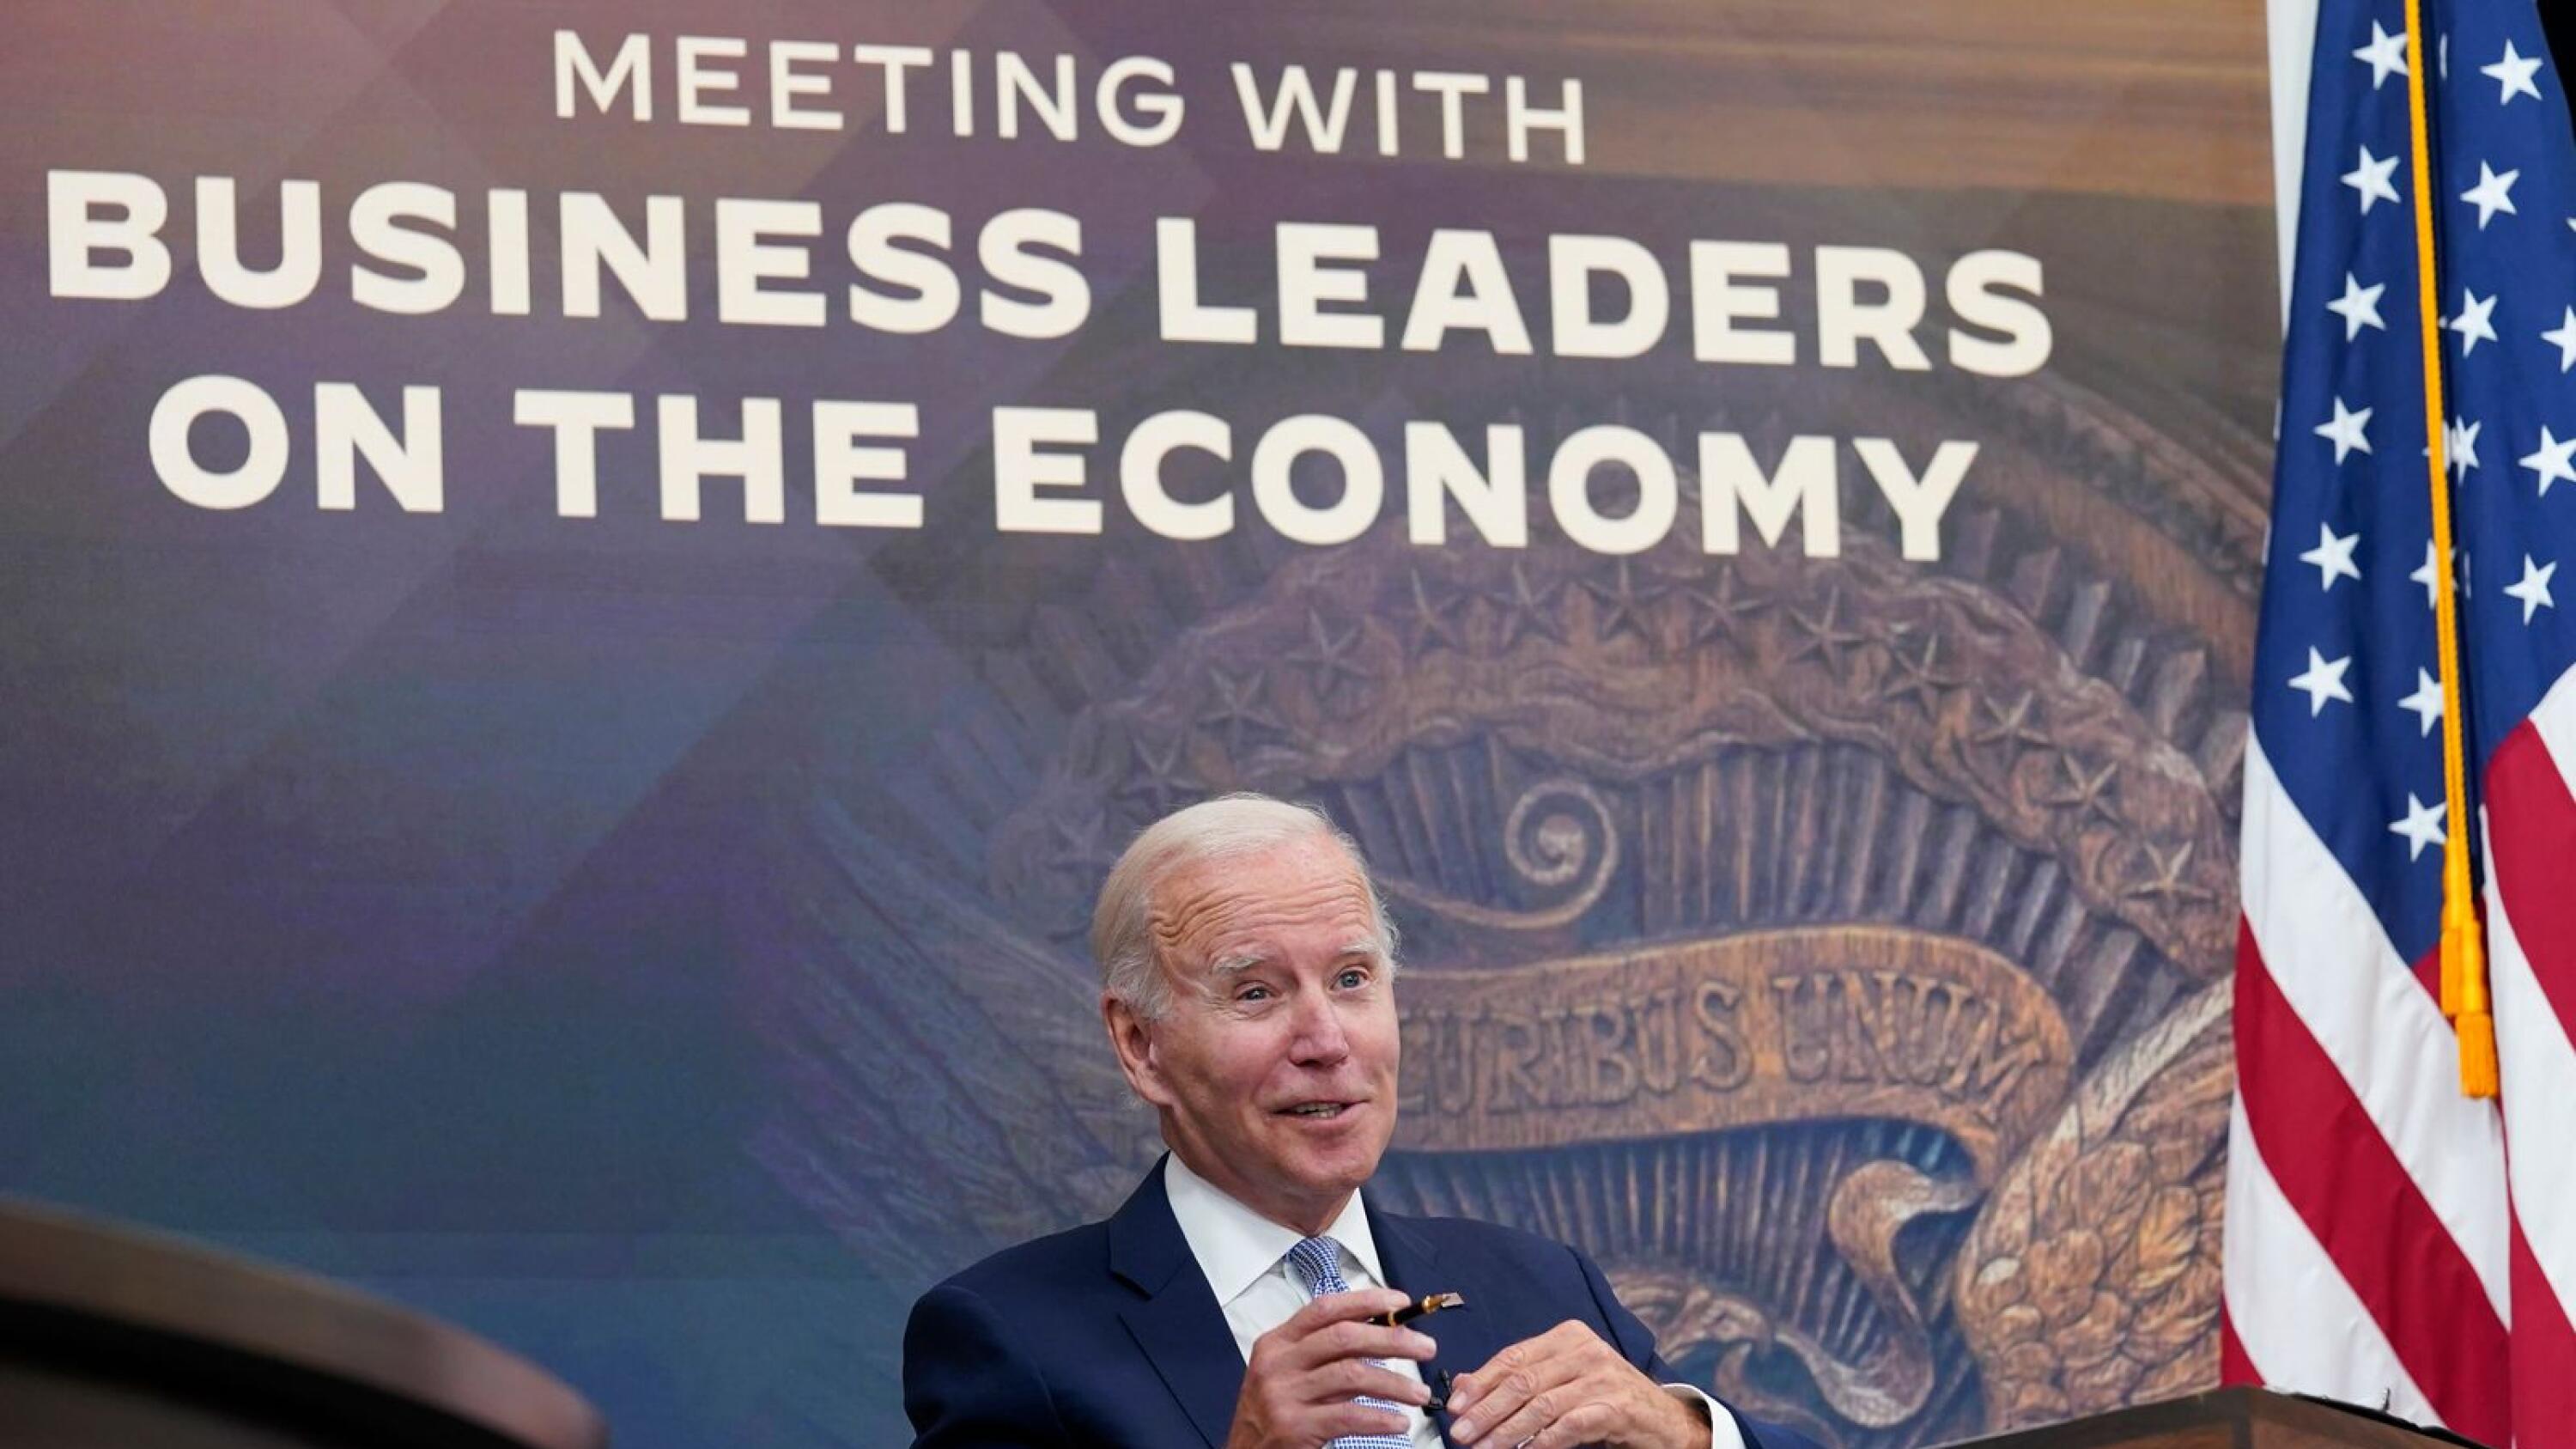 A policy win, an economic hit: Turbulent week reflects Biden's challenge